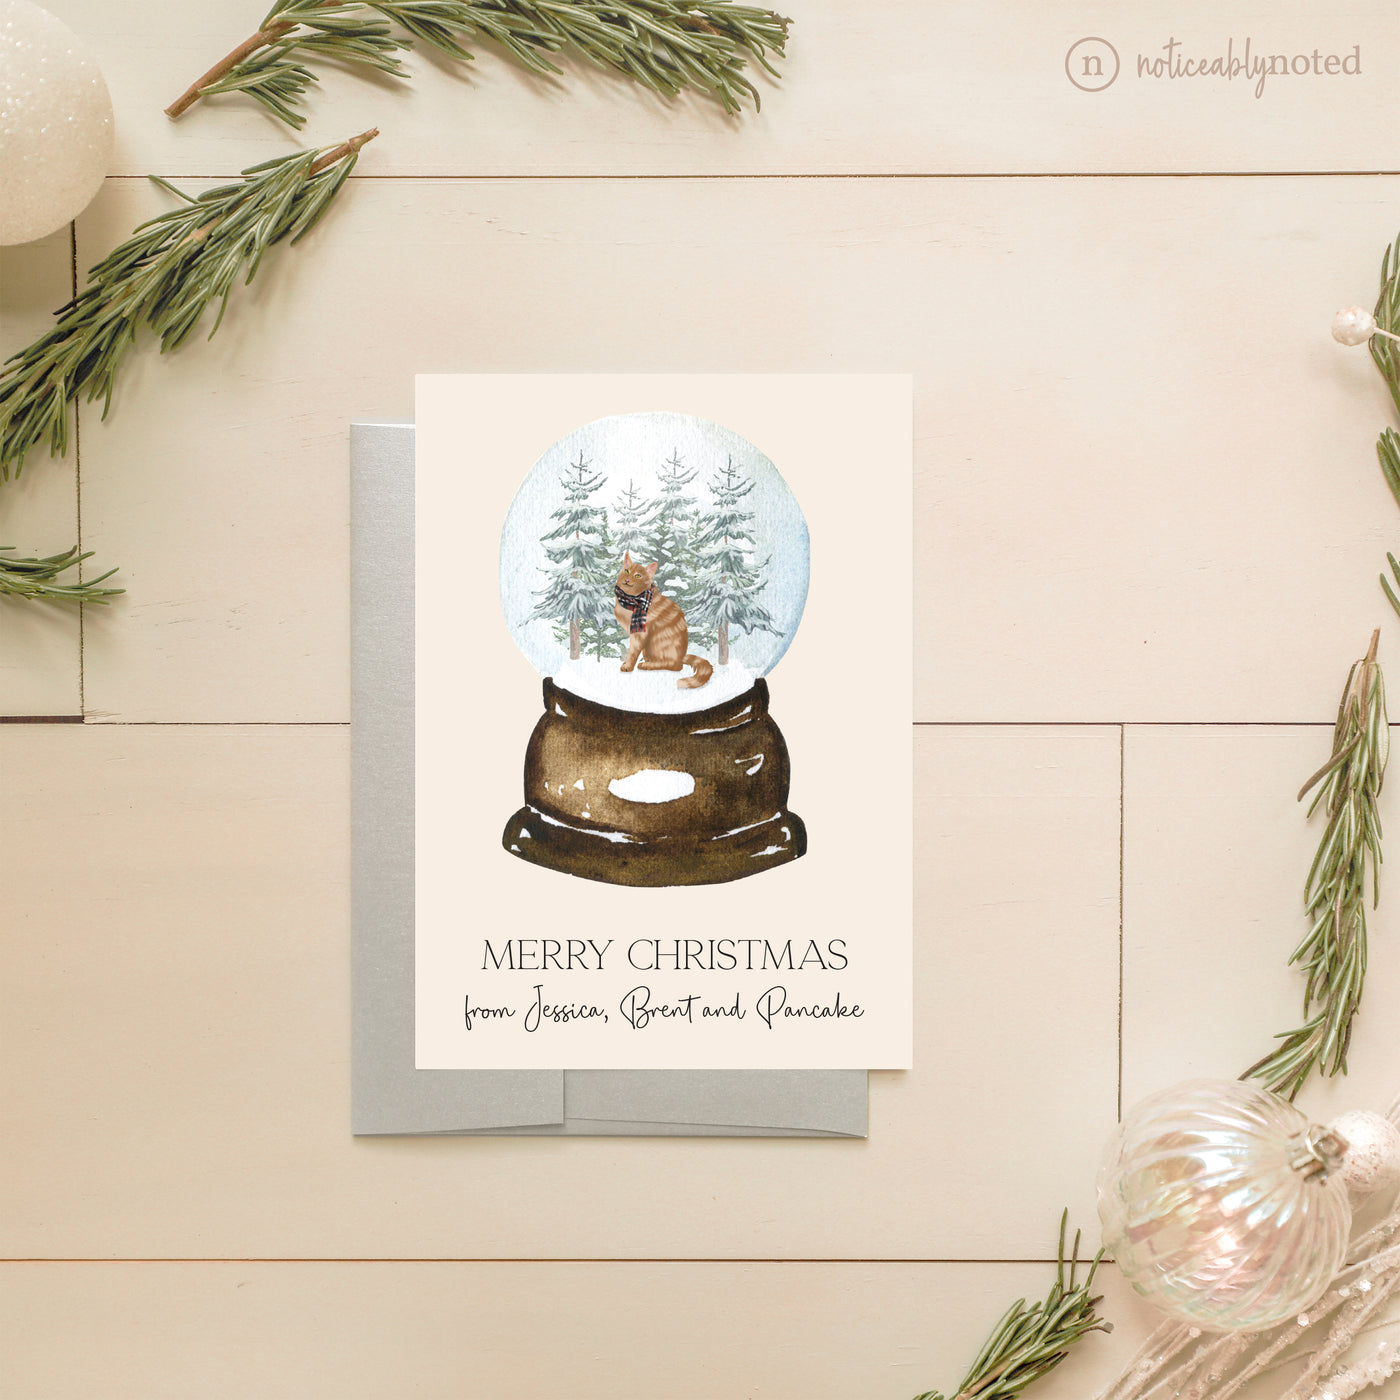 Norwegian Forest Holiday Card | Noticeably Noted